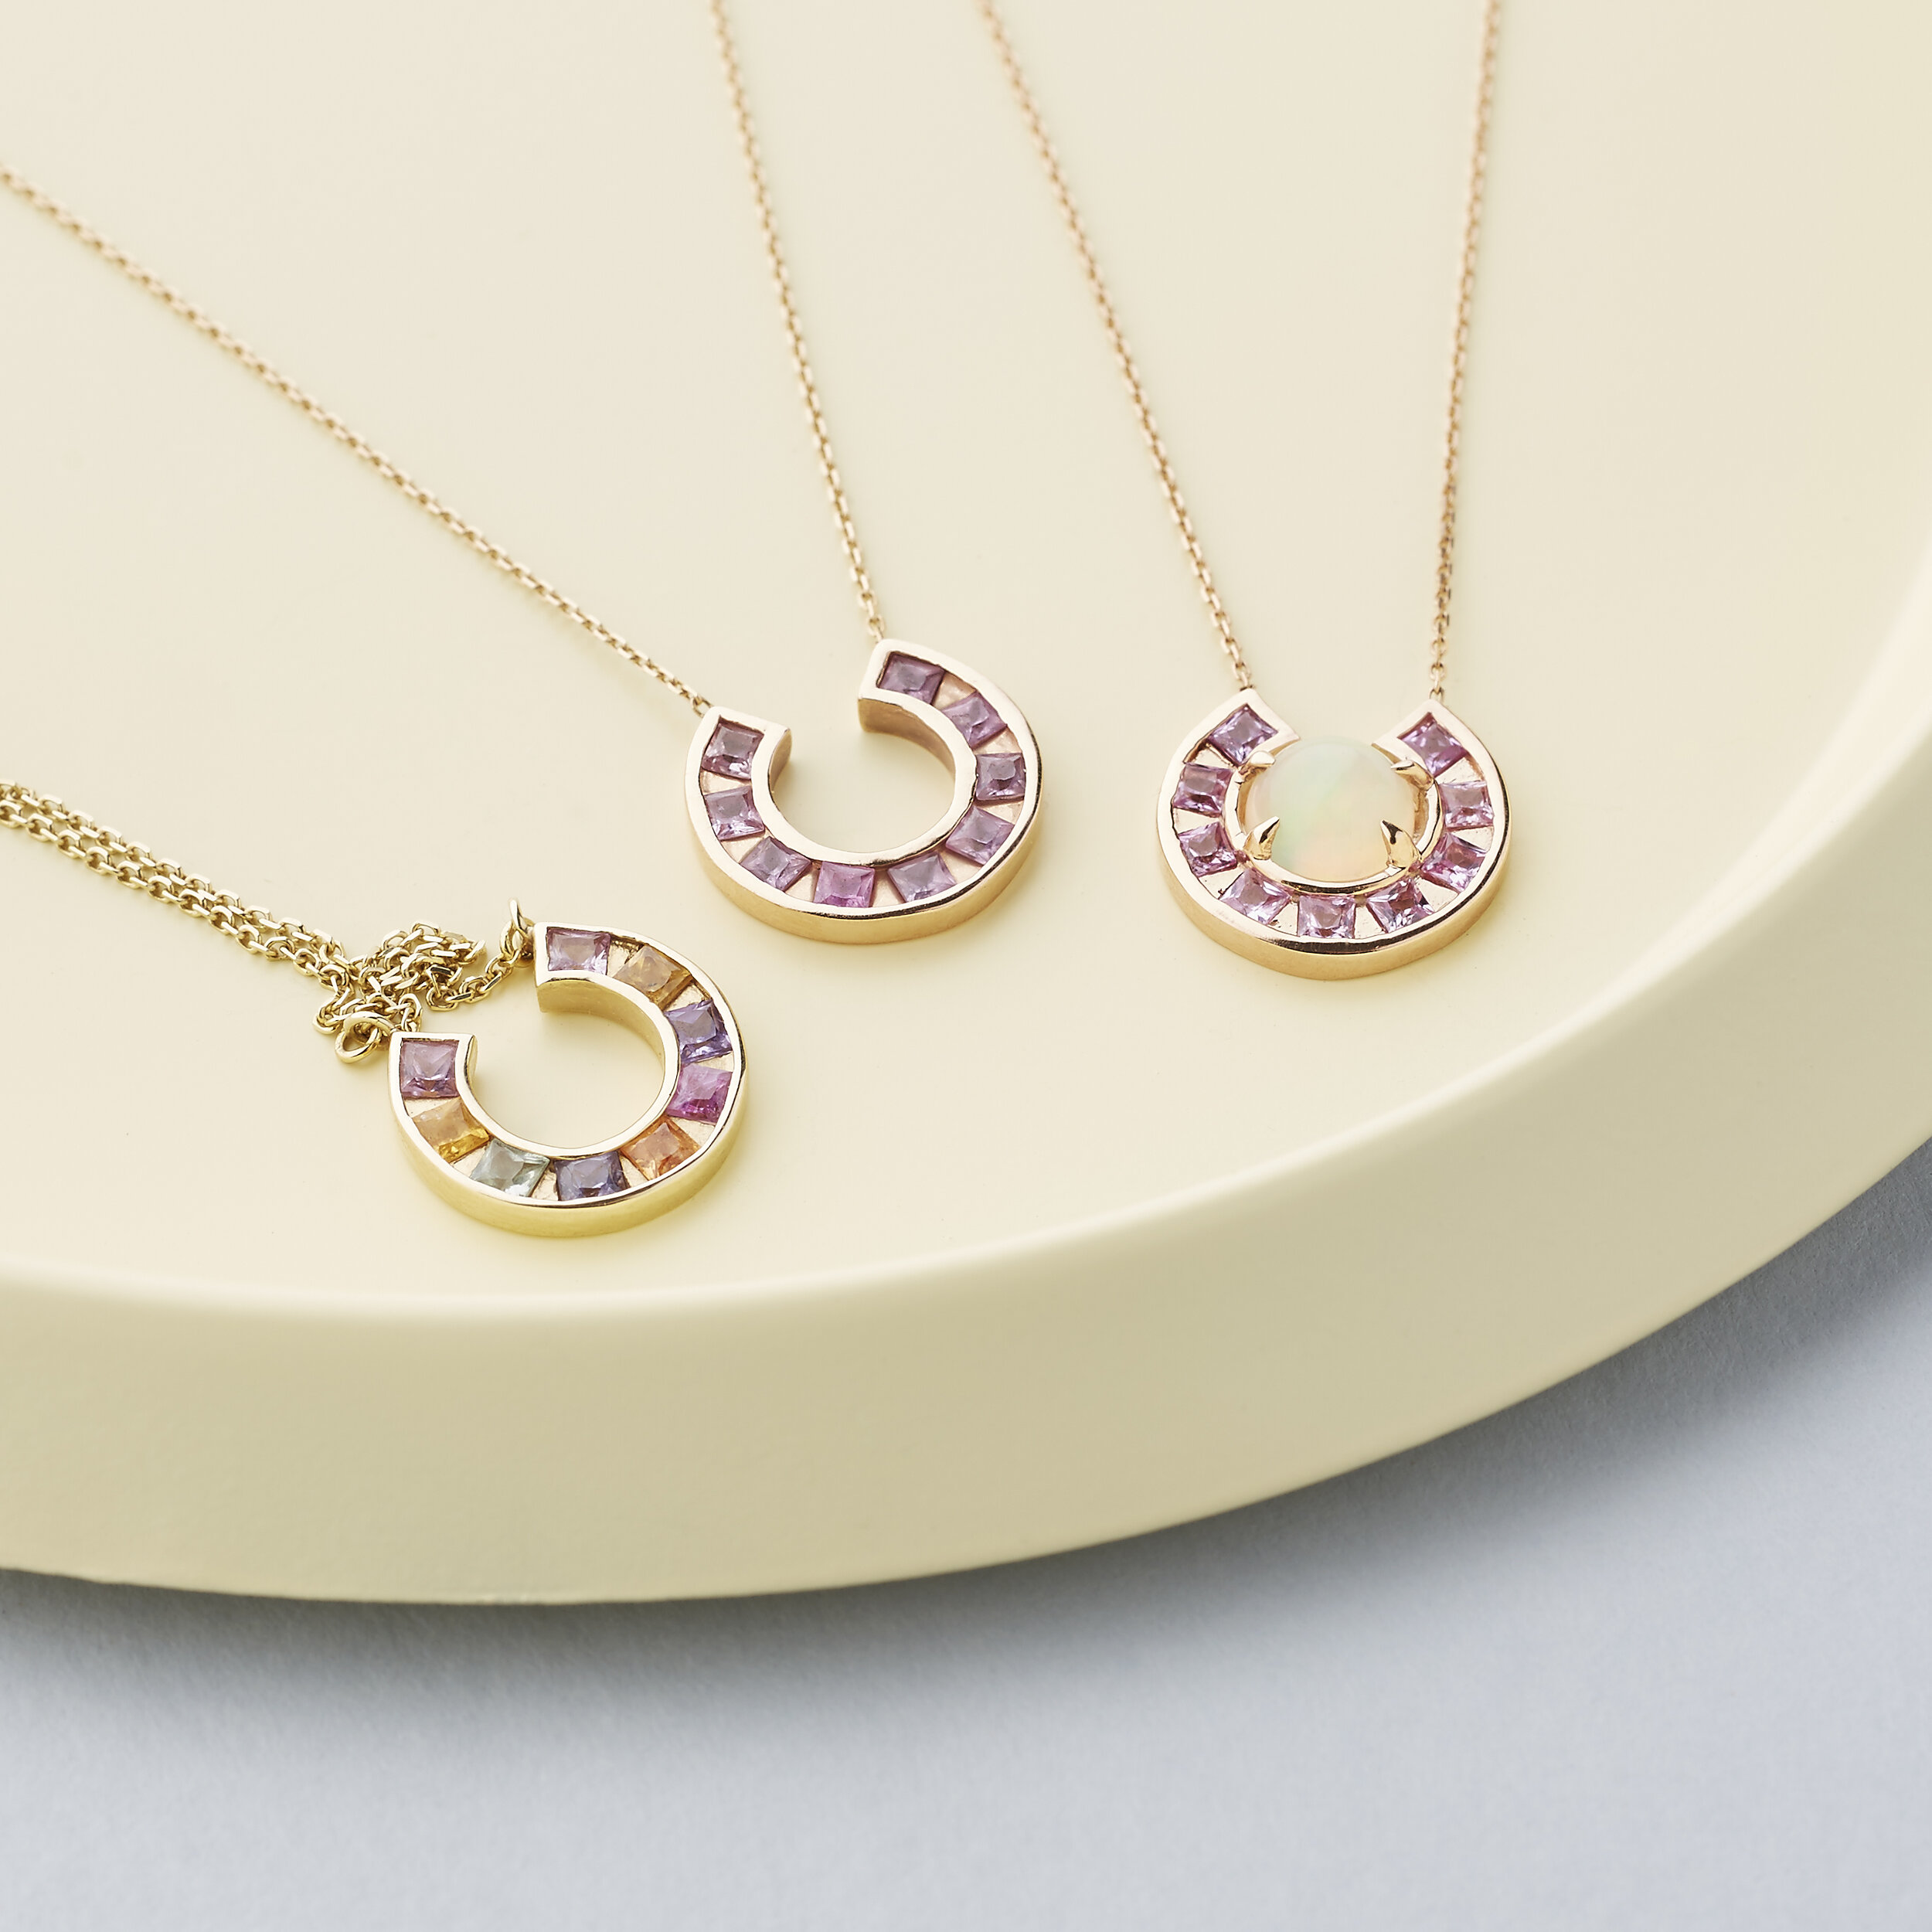  Sundial and Moon necklaces 